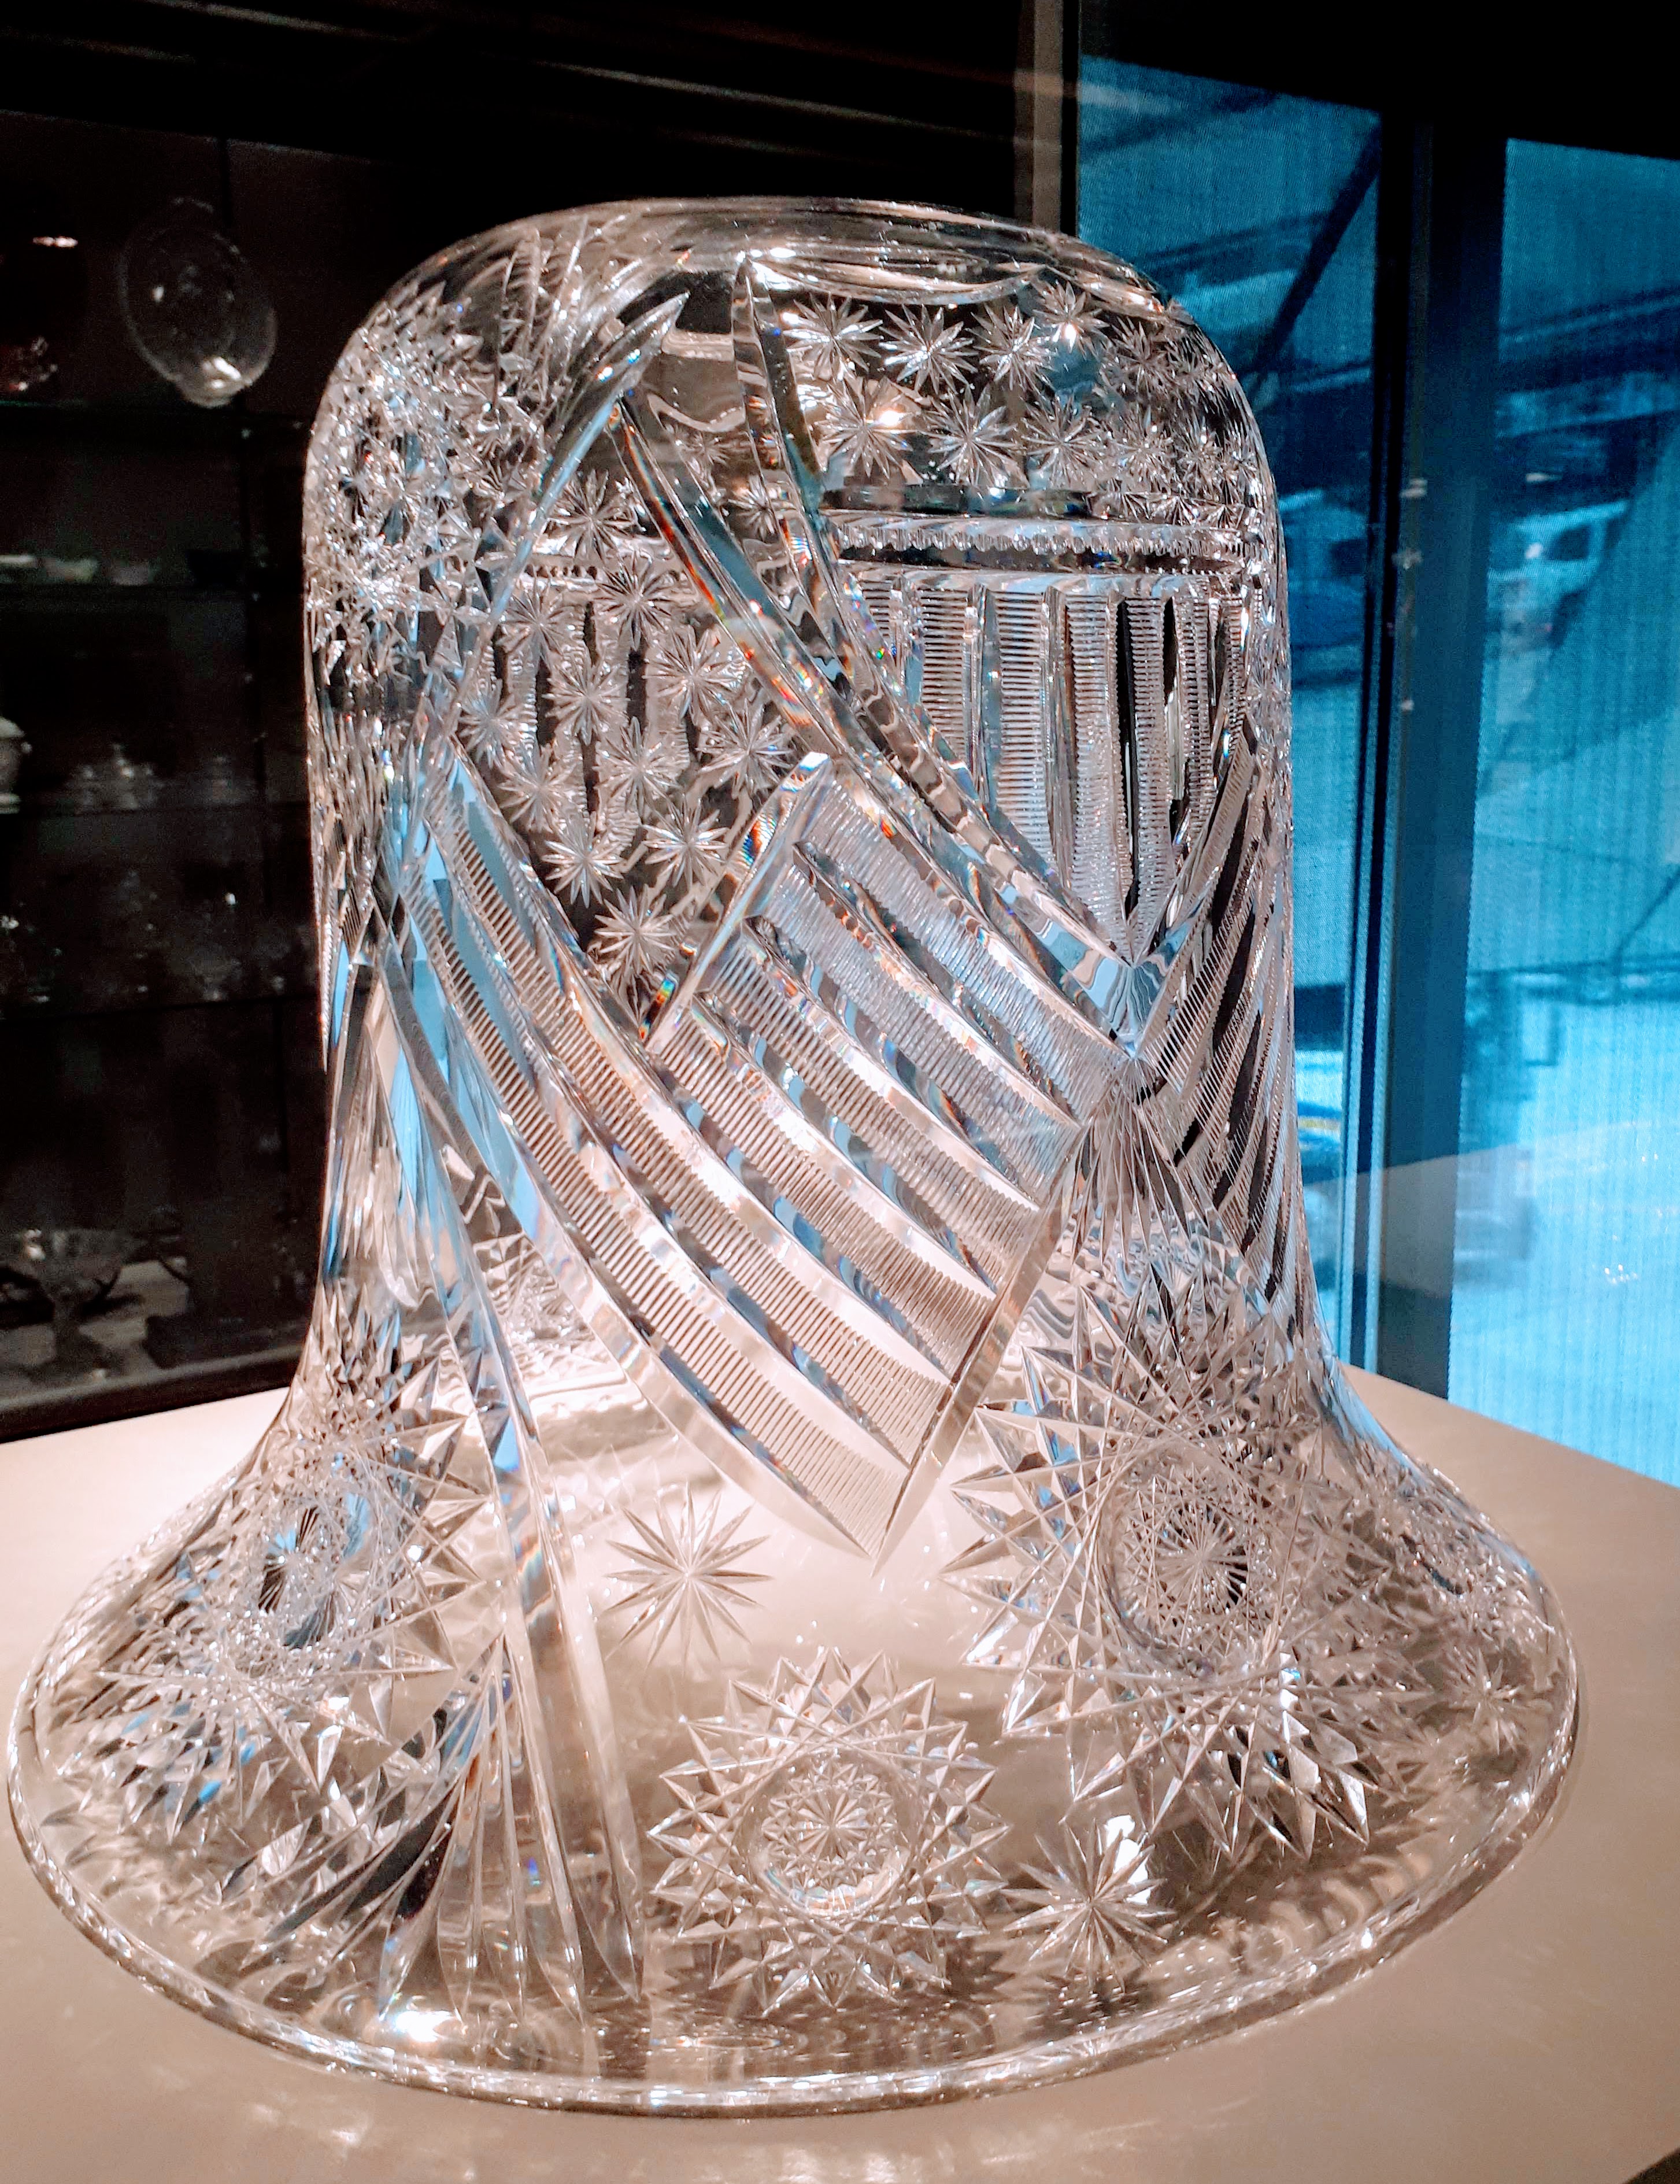 https://www.downshiftingpro.com/wp-content/uploads/2020/04/The-Liberty-Bell-in-the-Crystal-City-Gallery-at-the-Corning-Museum-of-Glass-@DownshiftingPRO.jpg